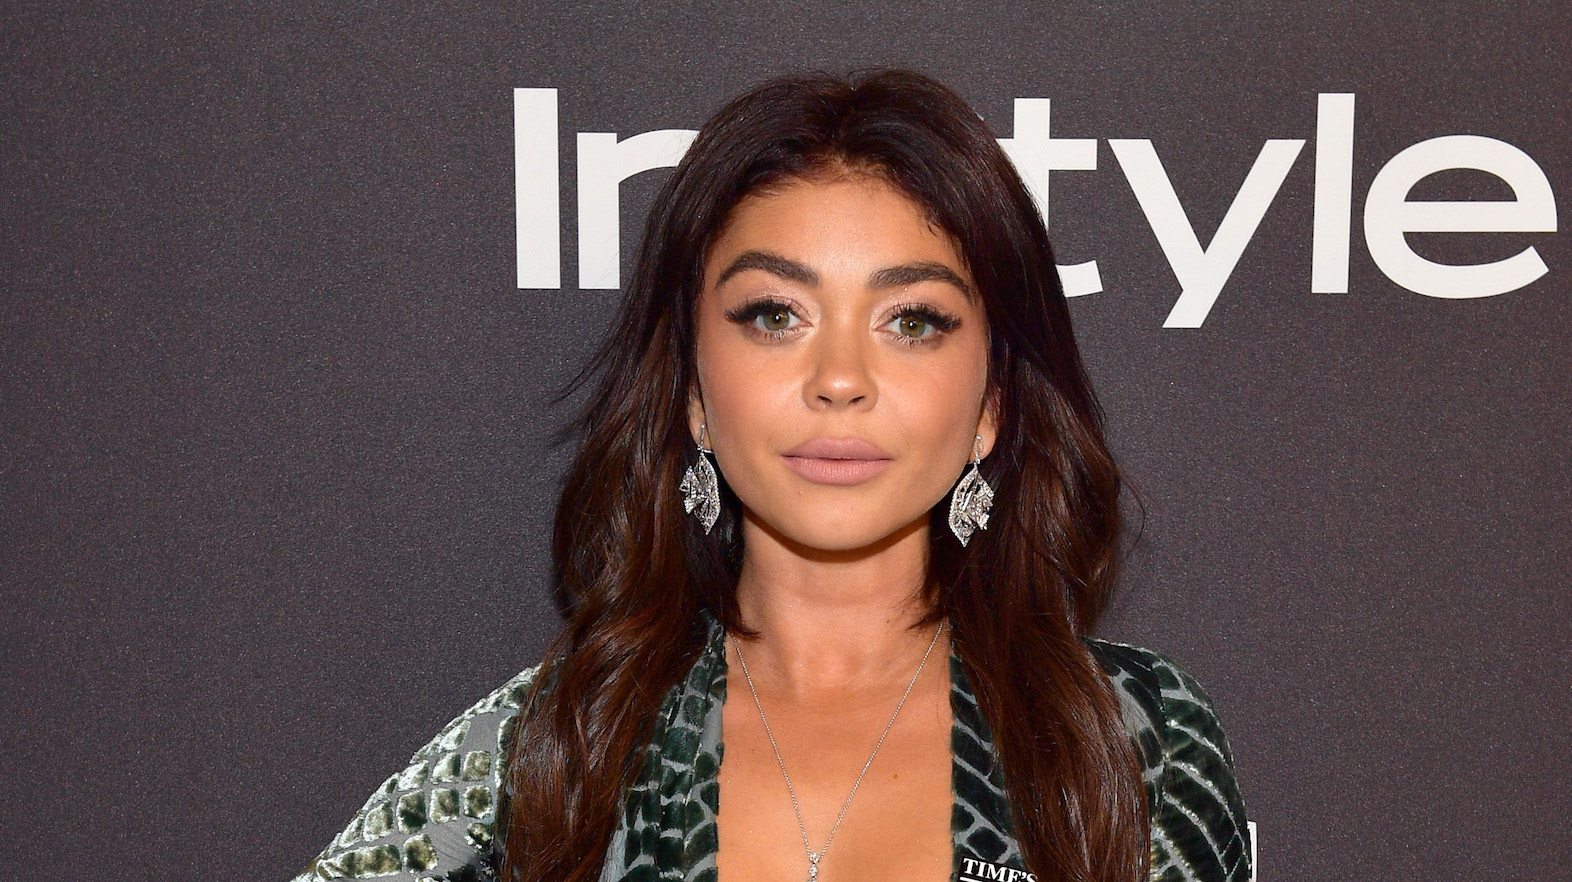 Sarah Hyland Reveals She Was 'Very Close' to Committing Suicide